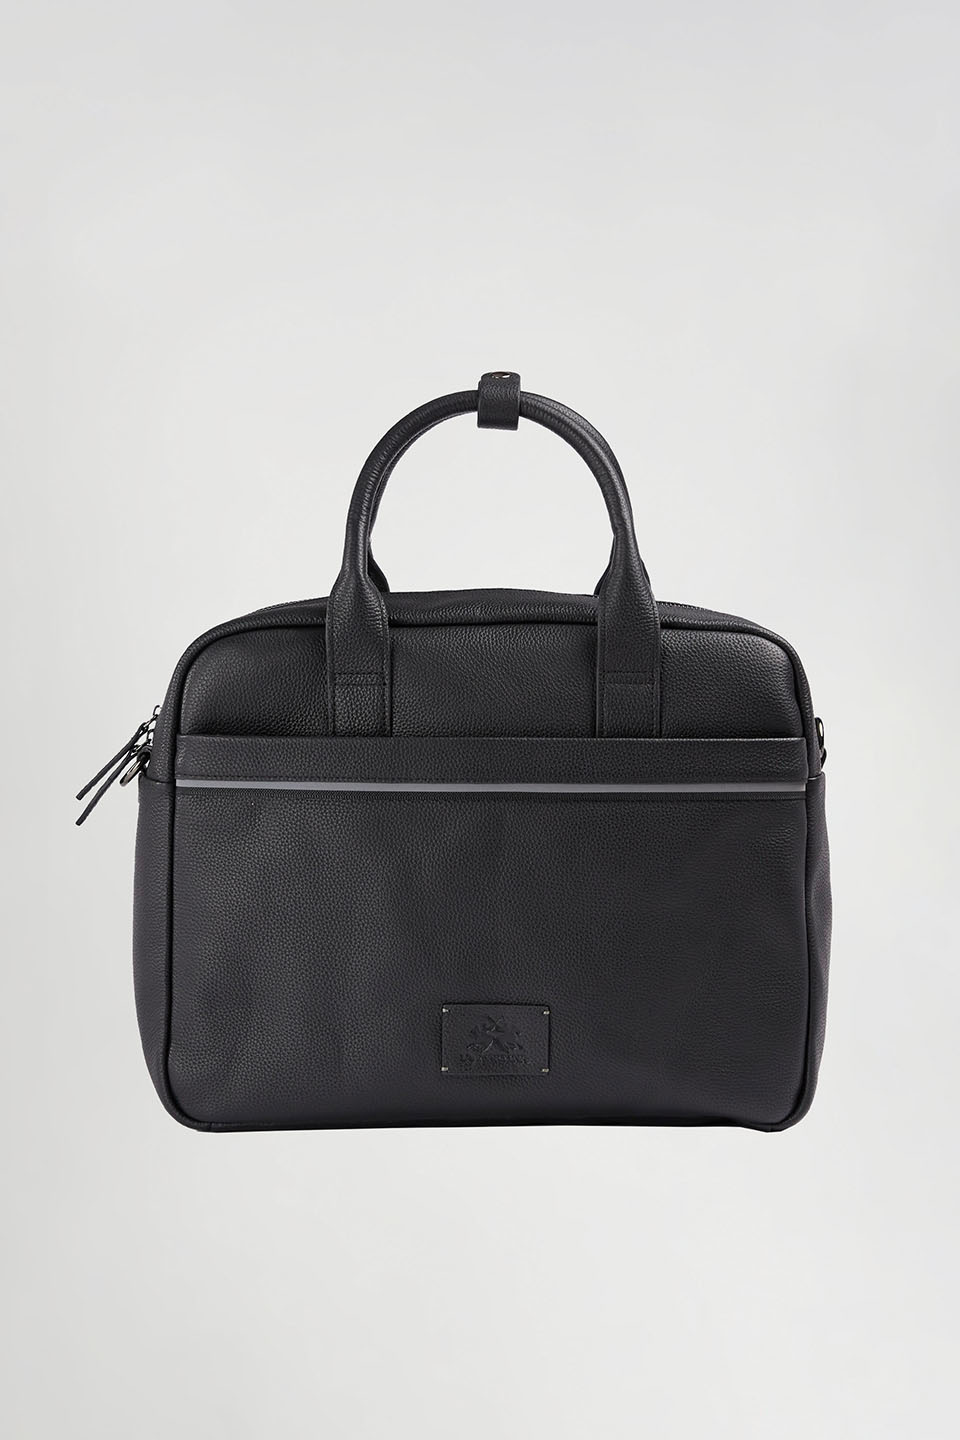 Backpack in calf leather | La Martina - Official Online Shop